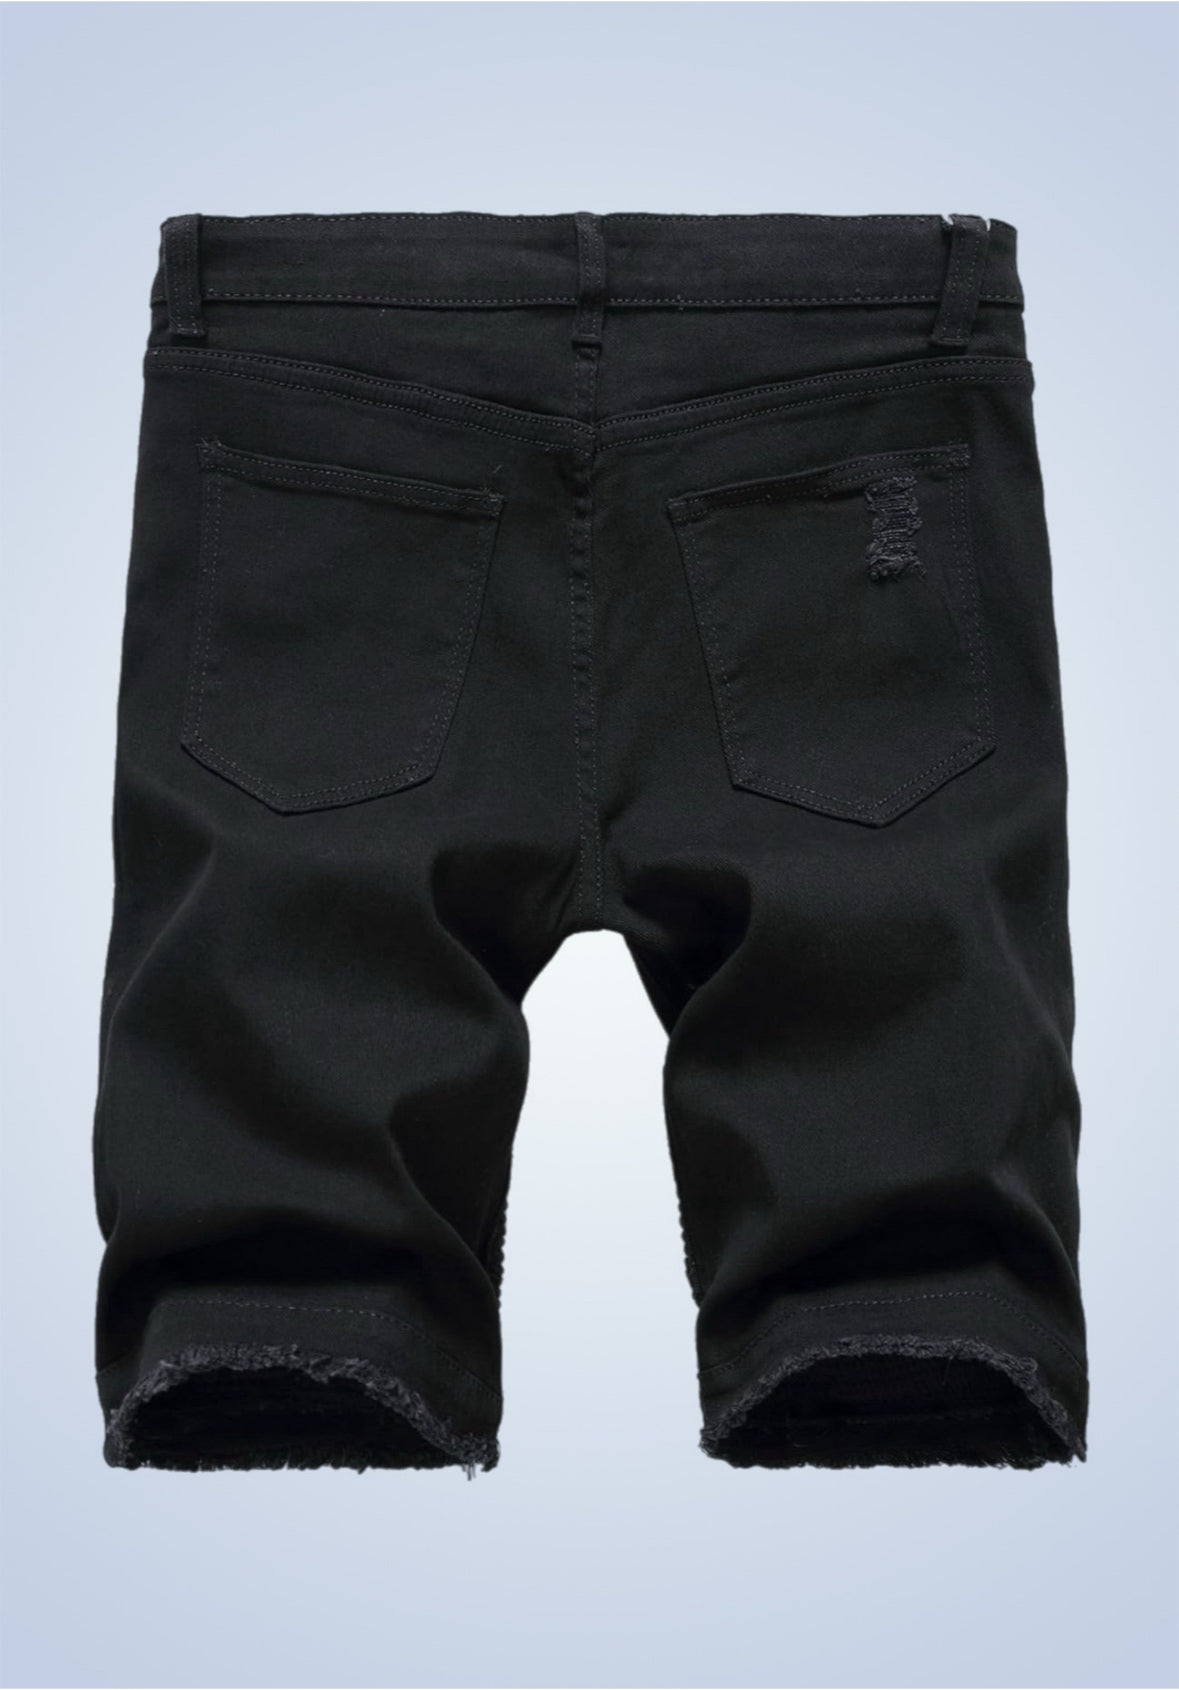 Men’s black distressed jean shorts by 2fifty2